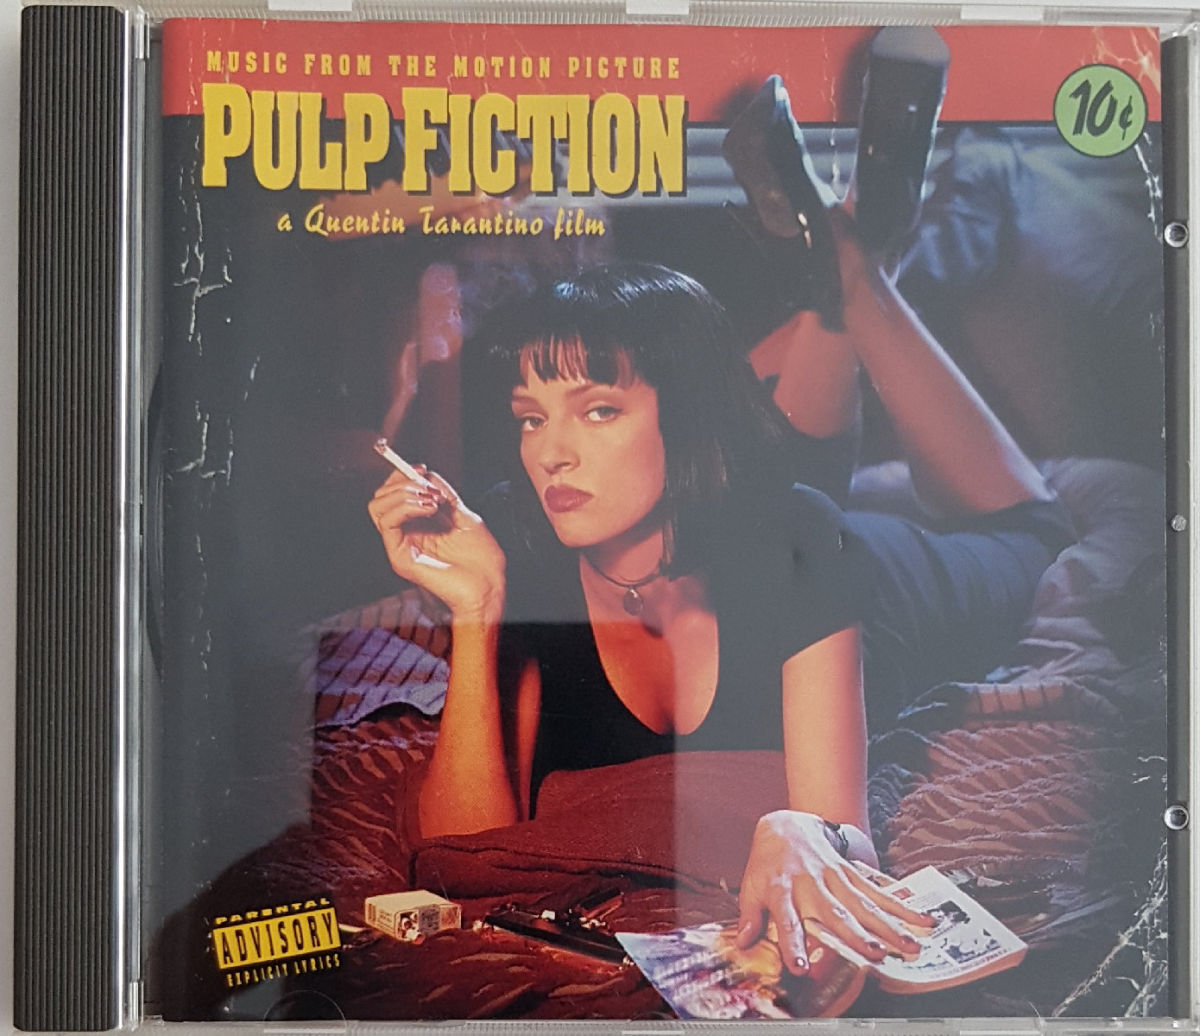 PULP FICTION MUSIC FROM THE MOTION PICTURE € 25,00 Vendora.gr